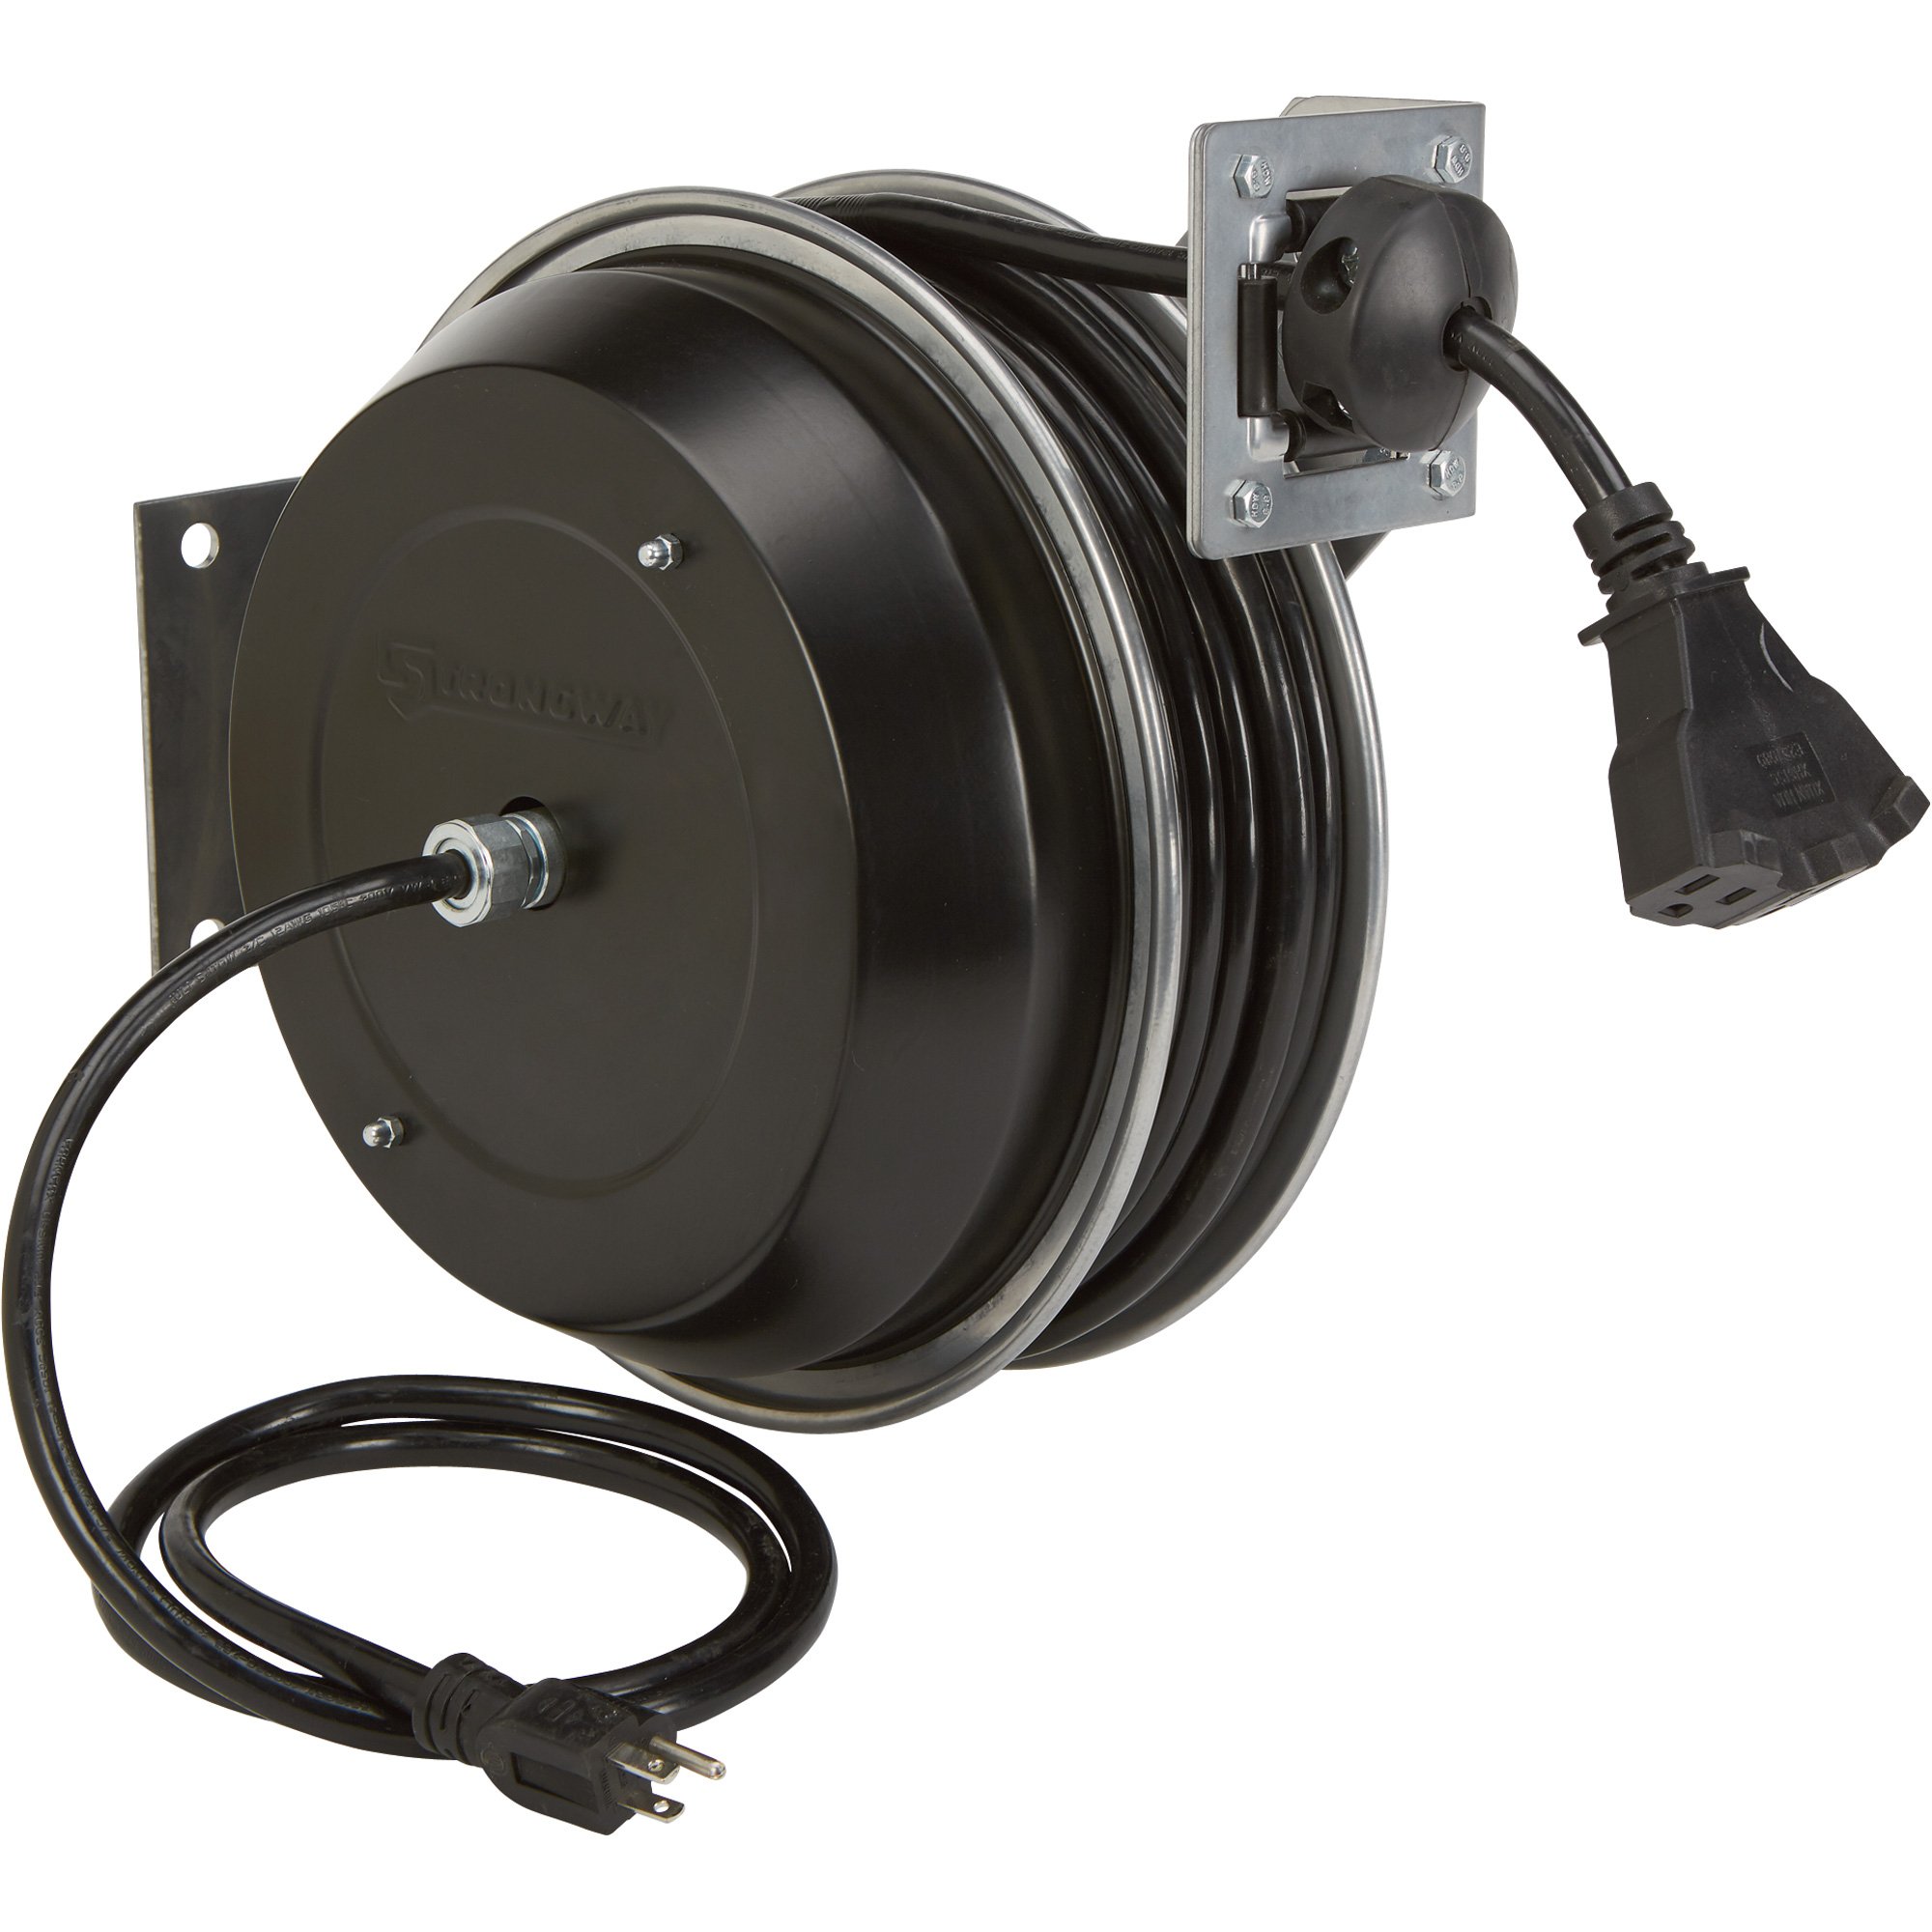 Strongway Heavy-Duty Retractable Extension Cord Reel — 75ft., 12/3